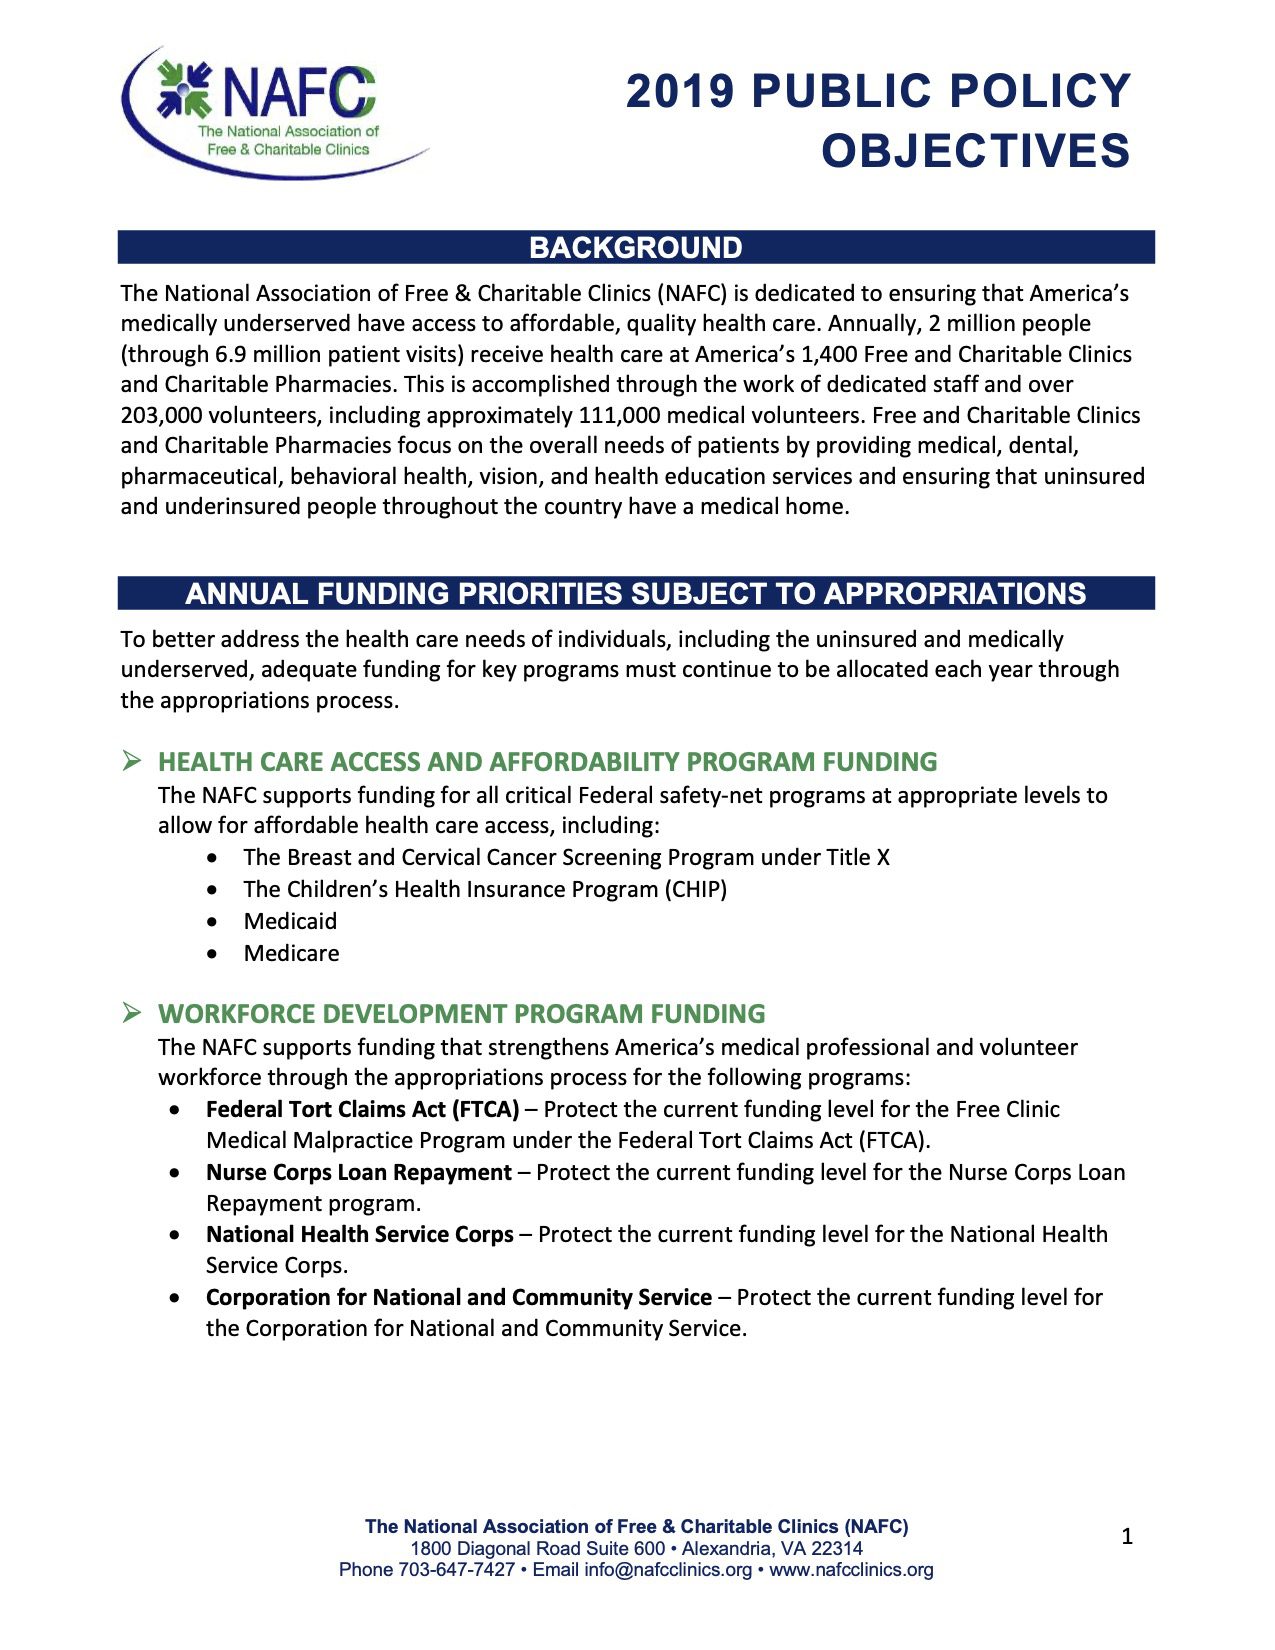 NAFC-2019-Federal-Policy-Objectives